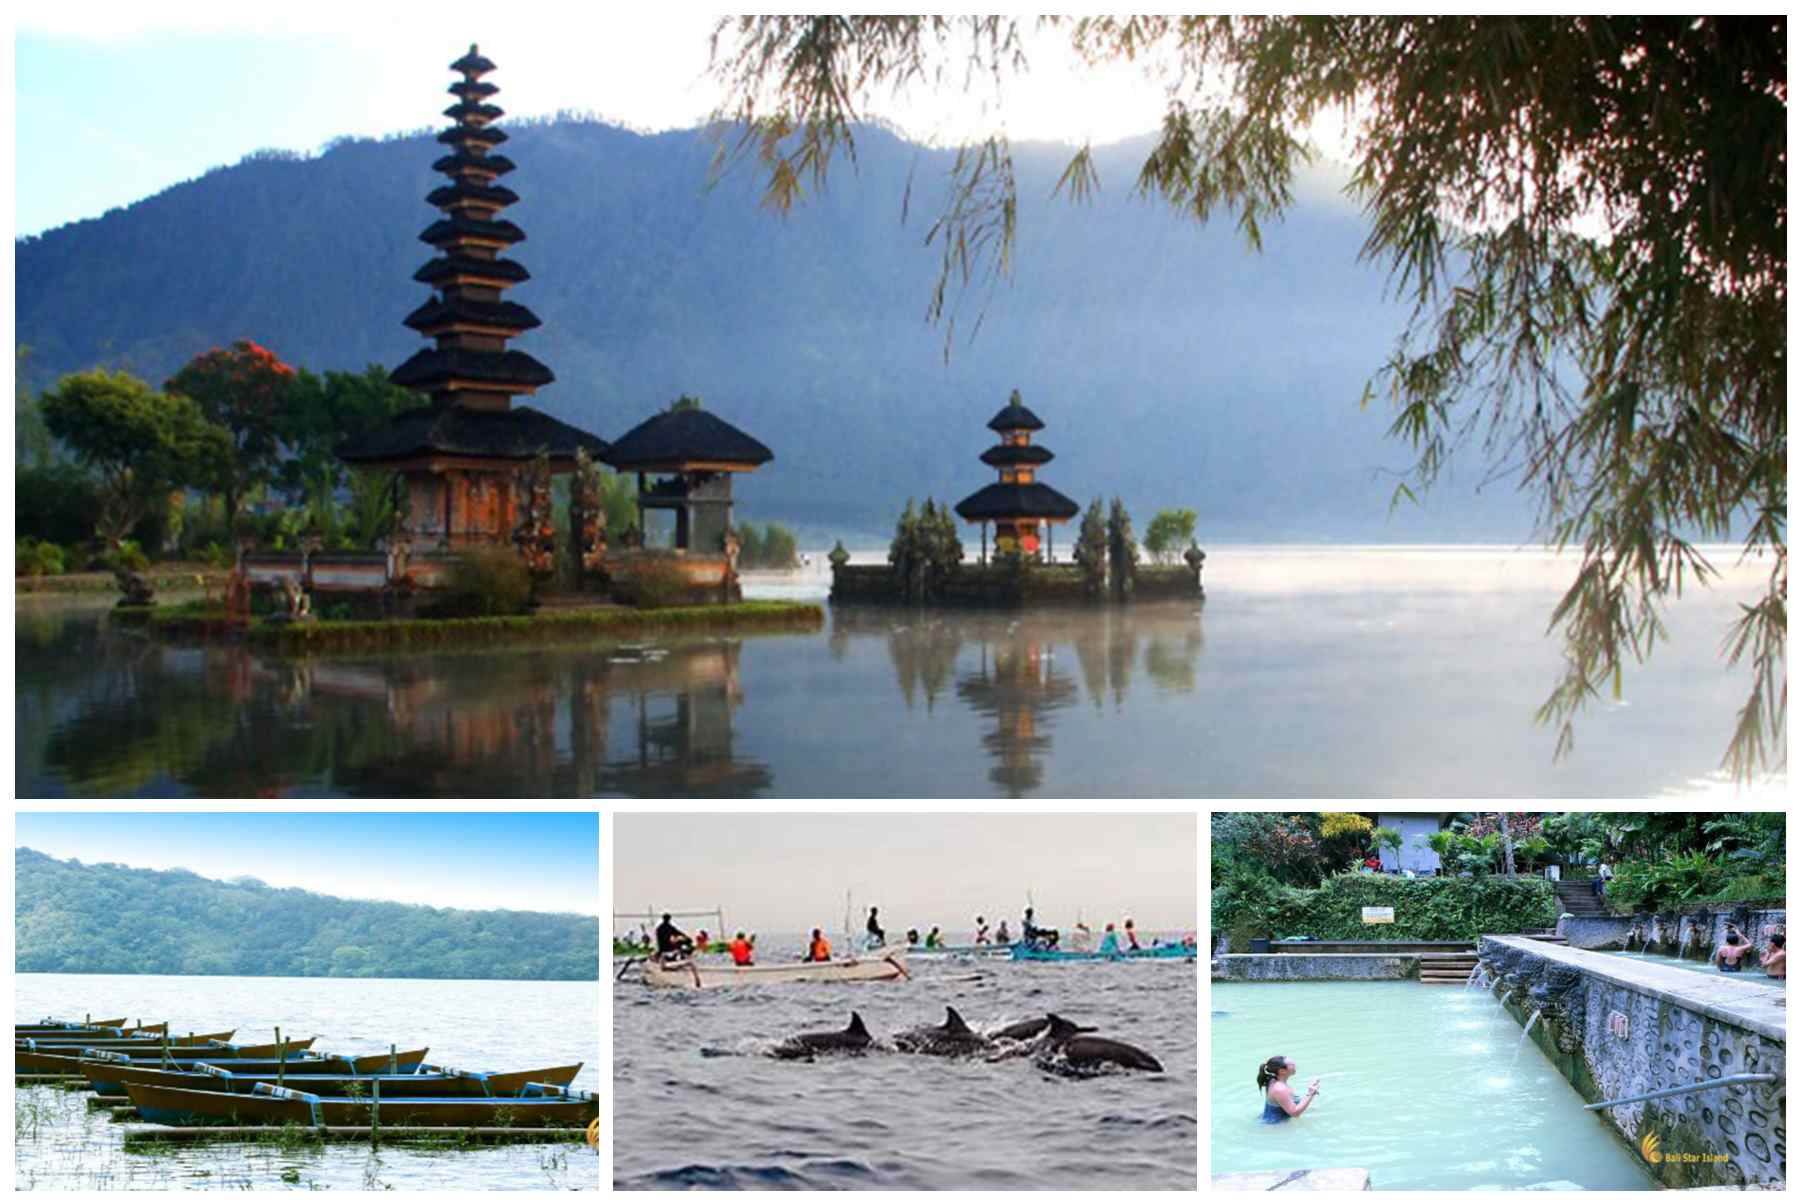 Dolphins, Bali Temples Tours and Hot Springs - Rhidays Holiday